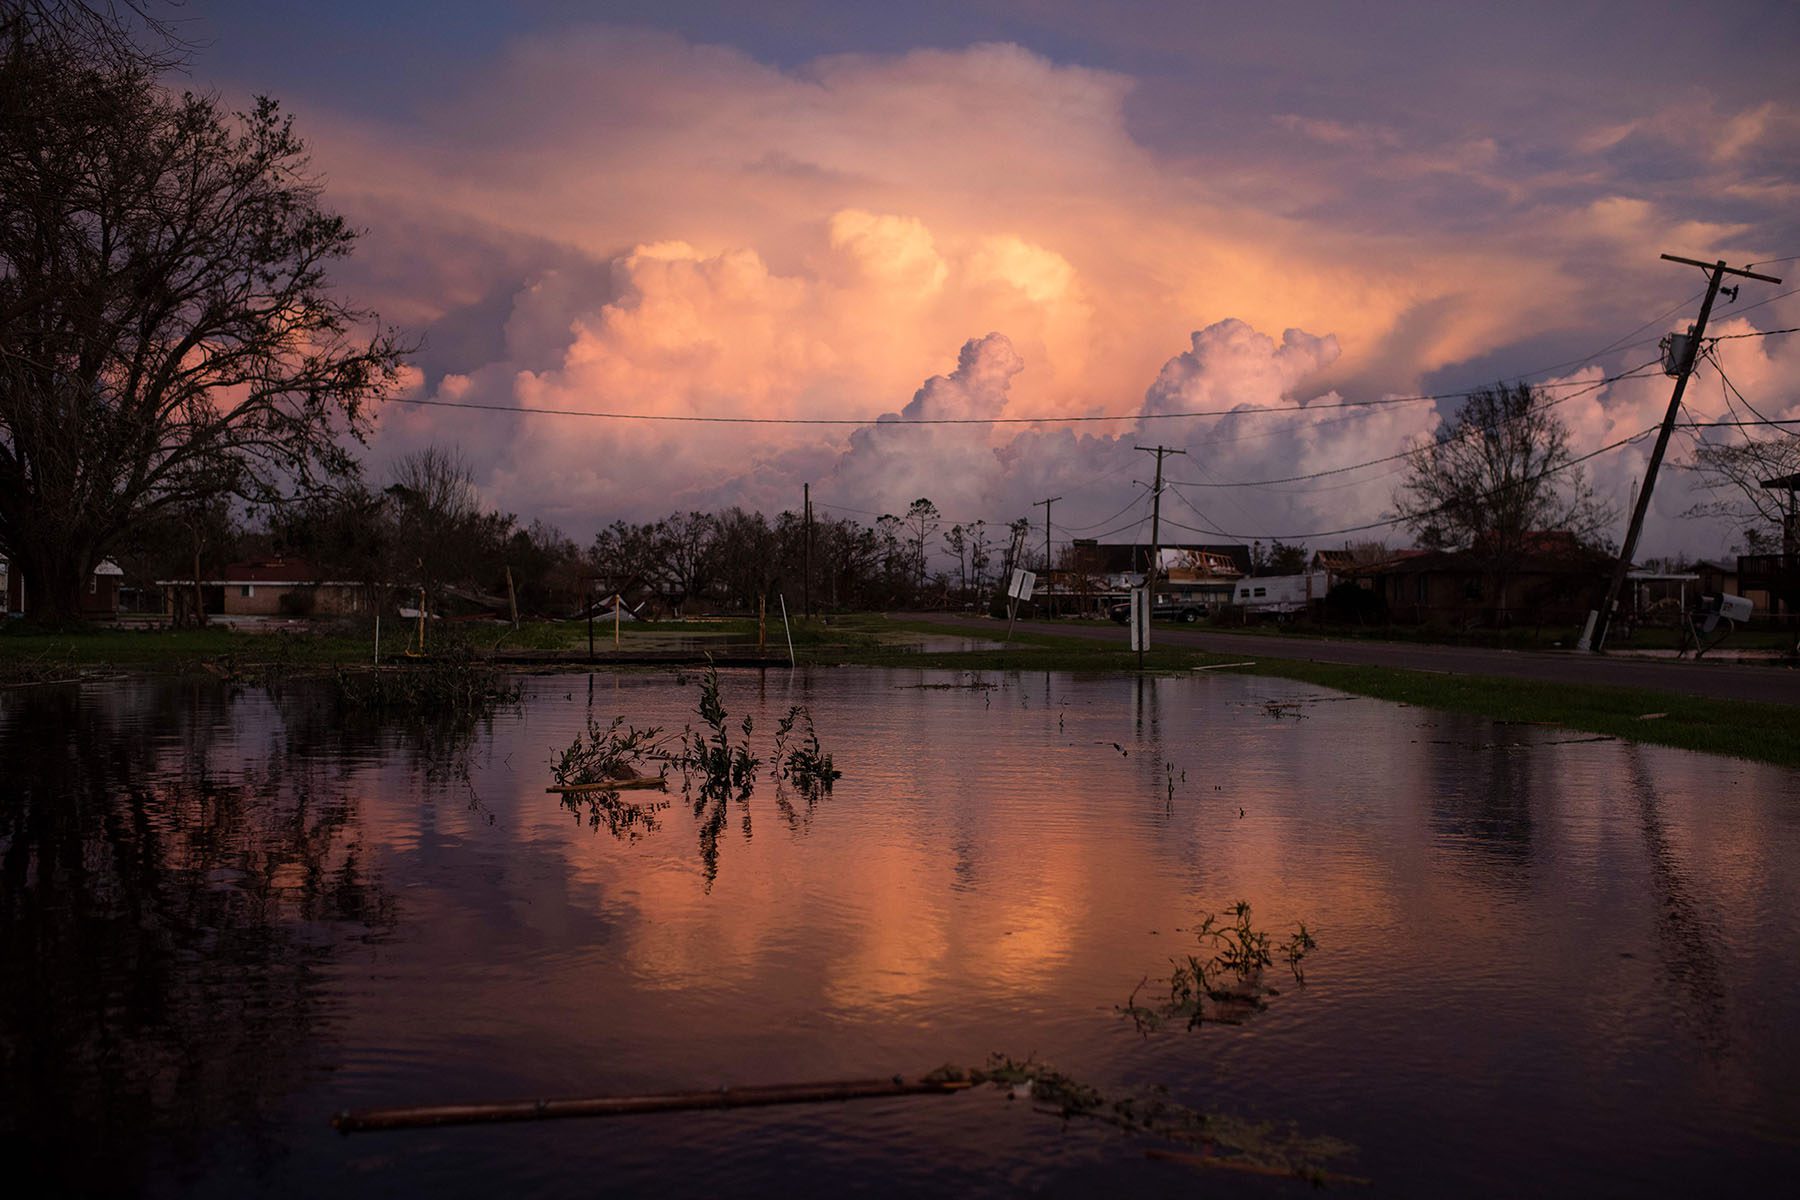 Large storm clouds are seen in the sky as a flooded road reflects the colorful sunset.